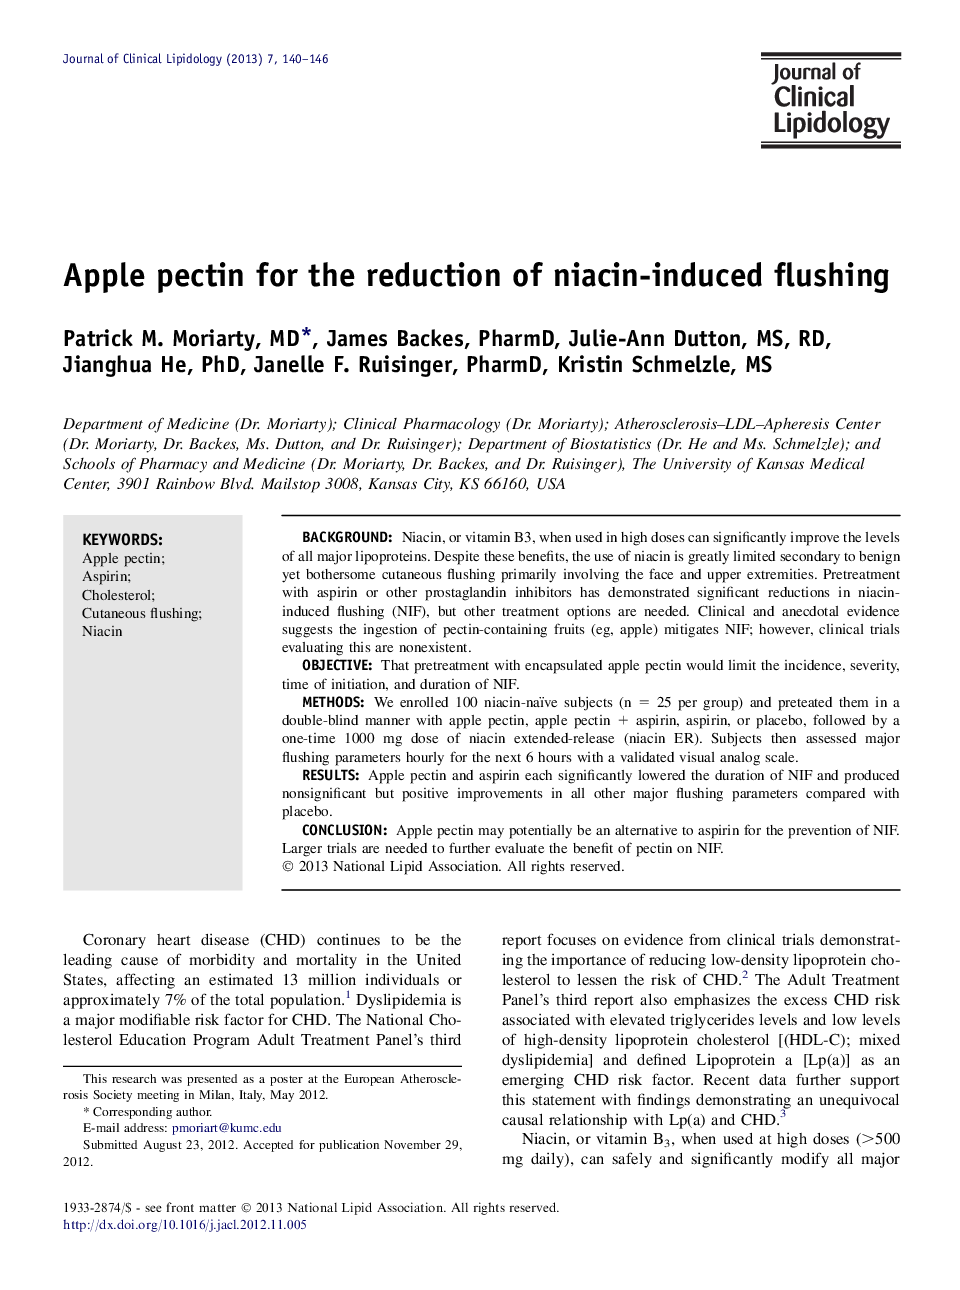 Apple pectin for the reduction of niacin-induced flushing